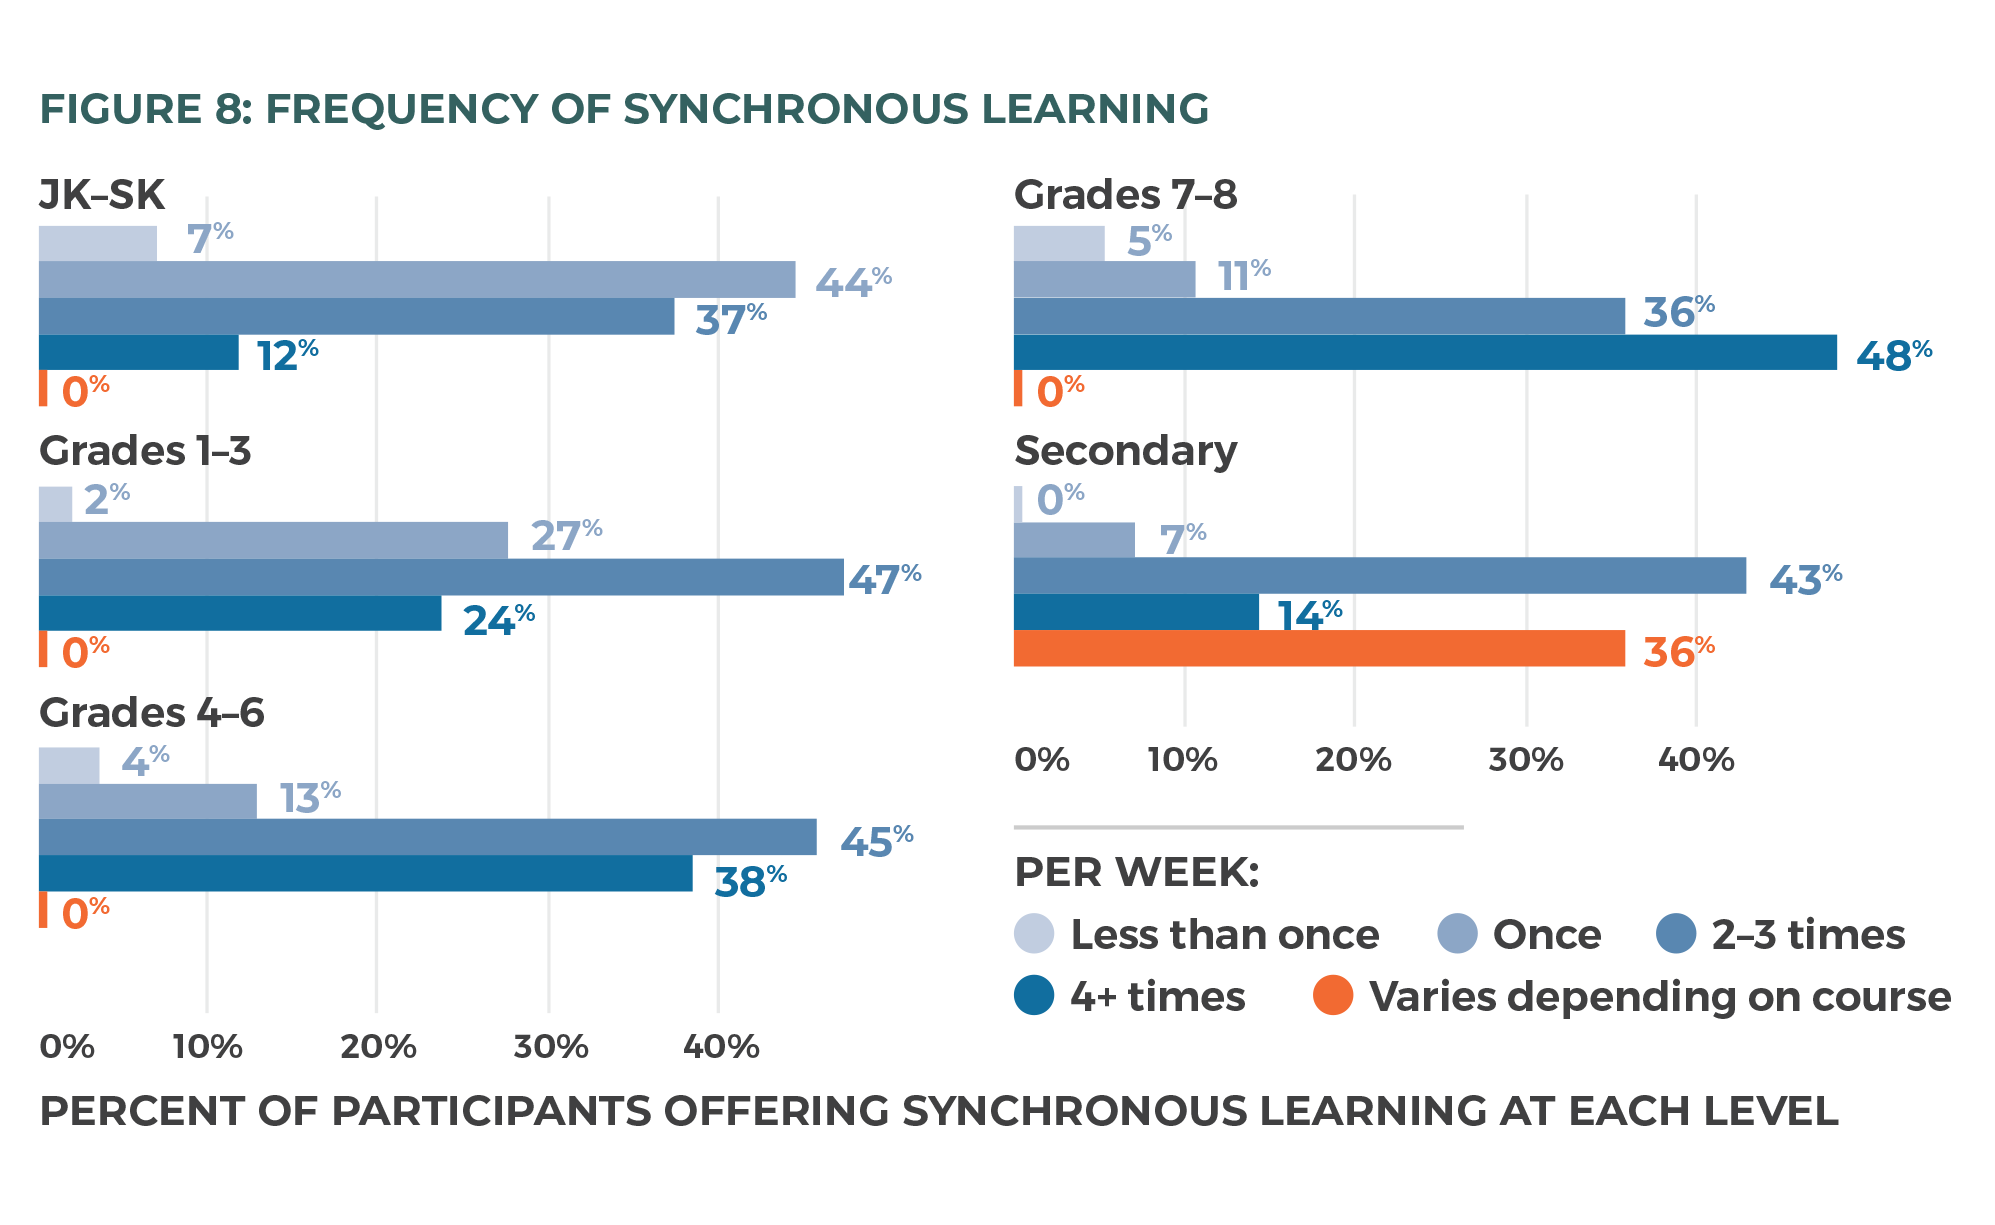 Figure 8: Frequency of synchronous learning at each level